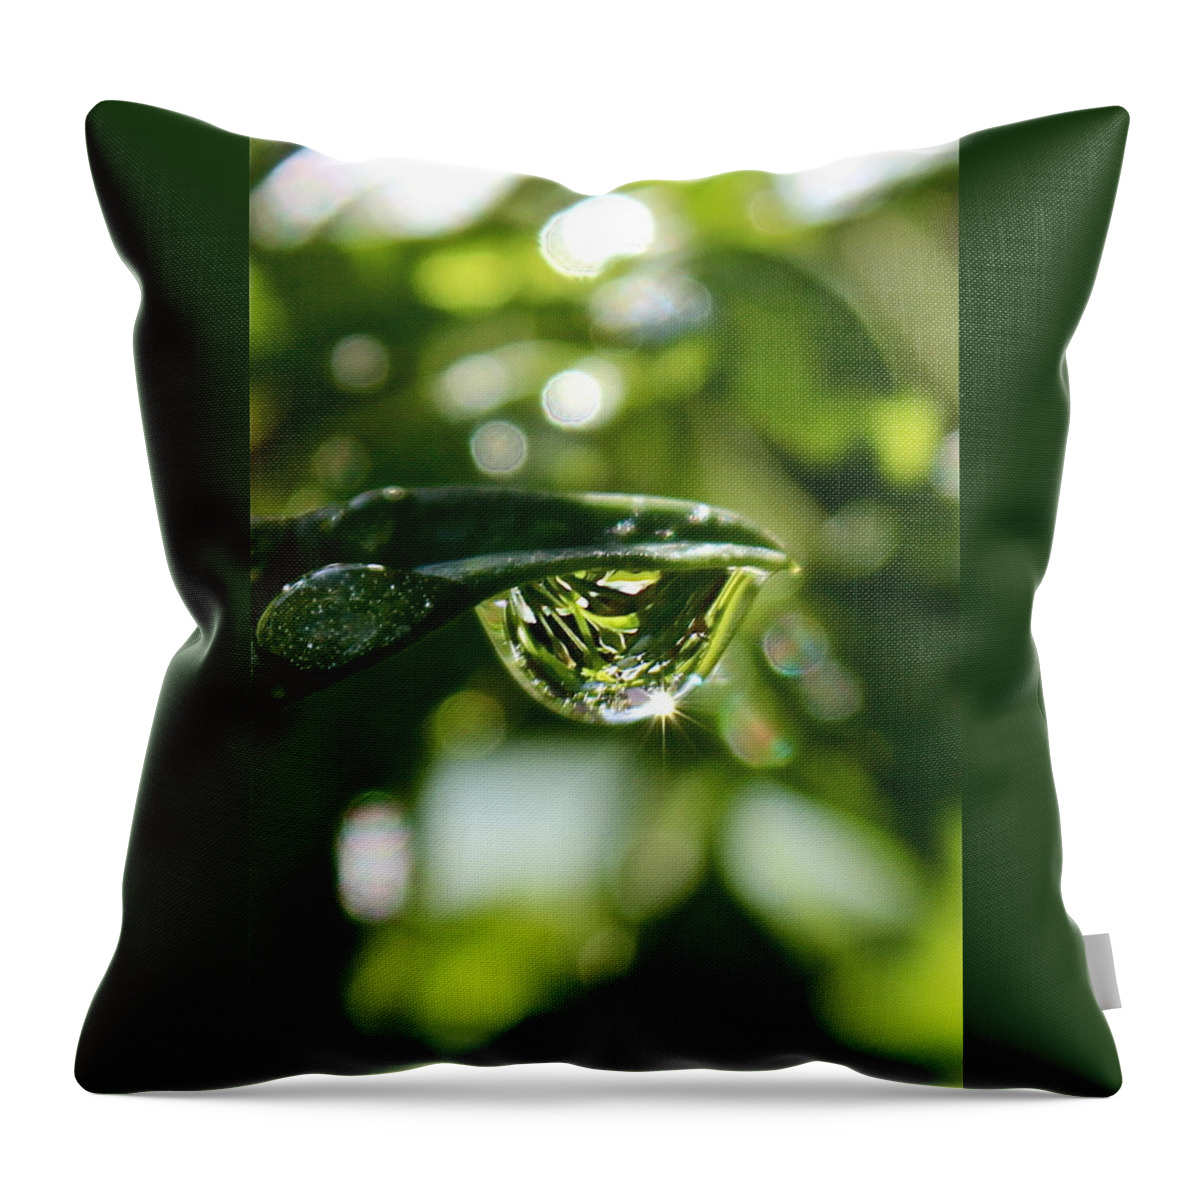 Water Drops Throw Pillow featuring the photograph Garden Reflections by Kume Bryant